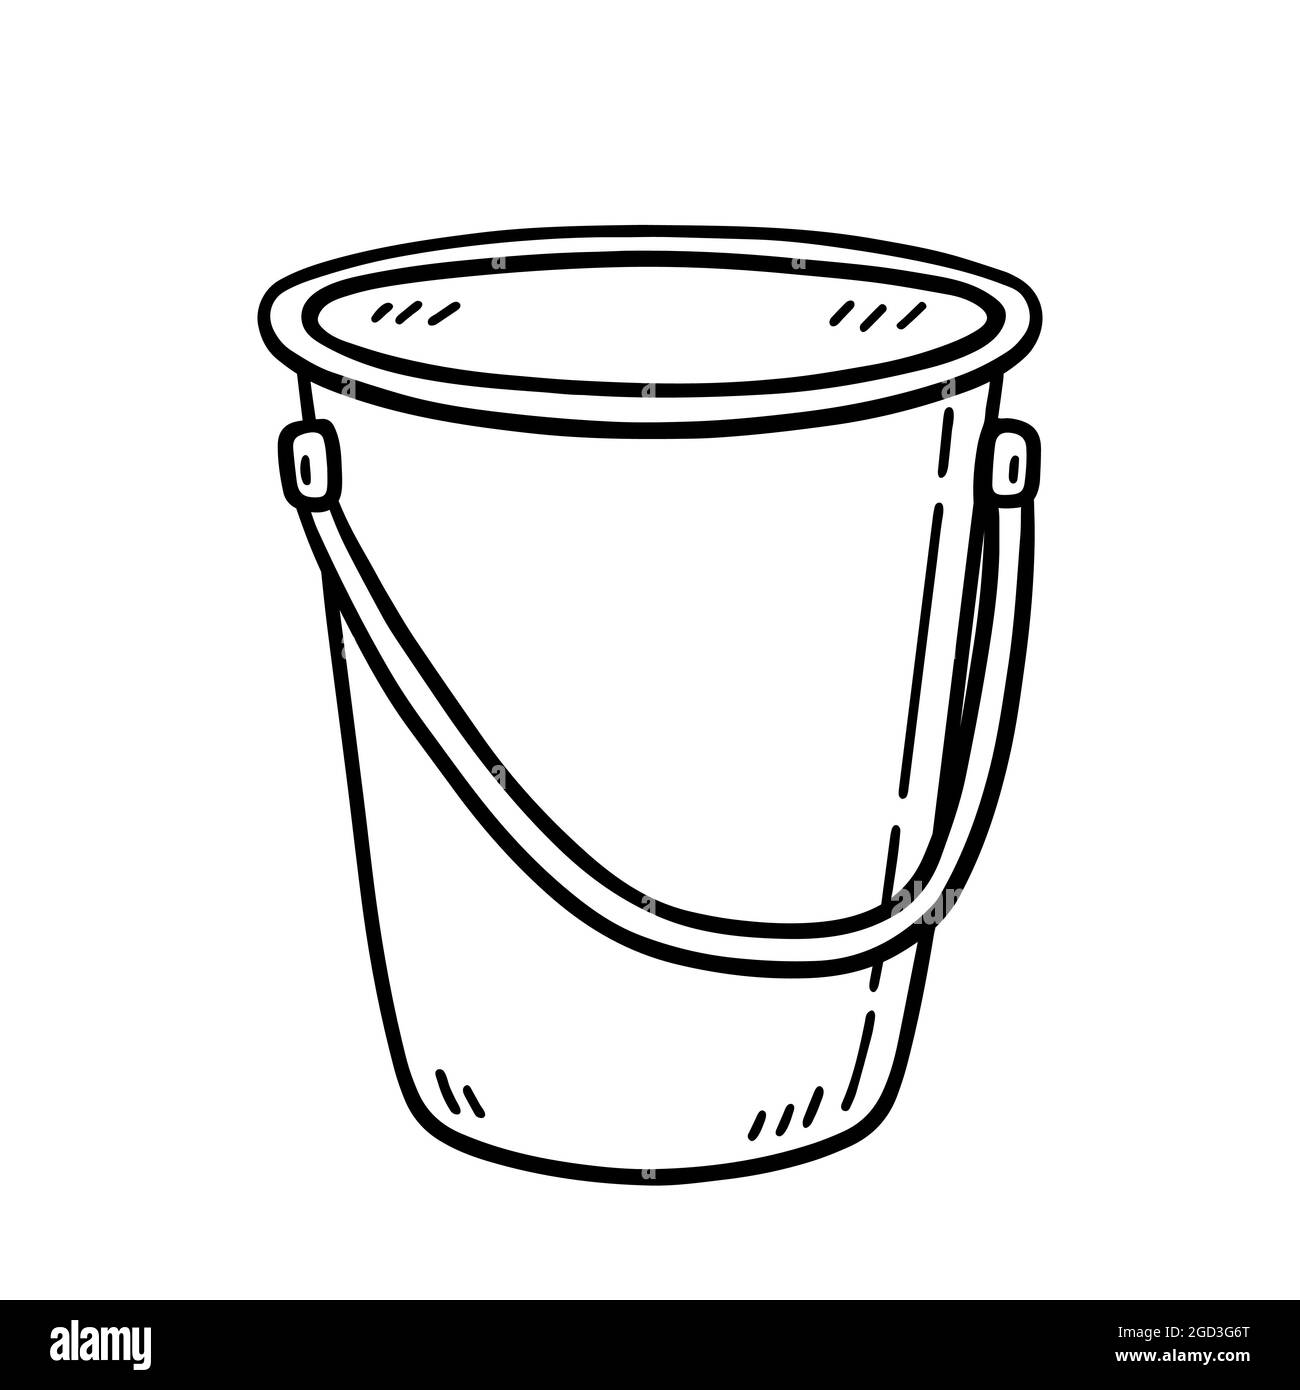 Cleaning bucket with handle isolated on white background. Vector hand-drawn illustration in doodle style. Suitable for your projects, decorations, logo, various designs. Stock Vector